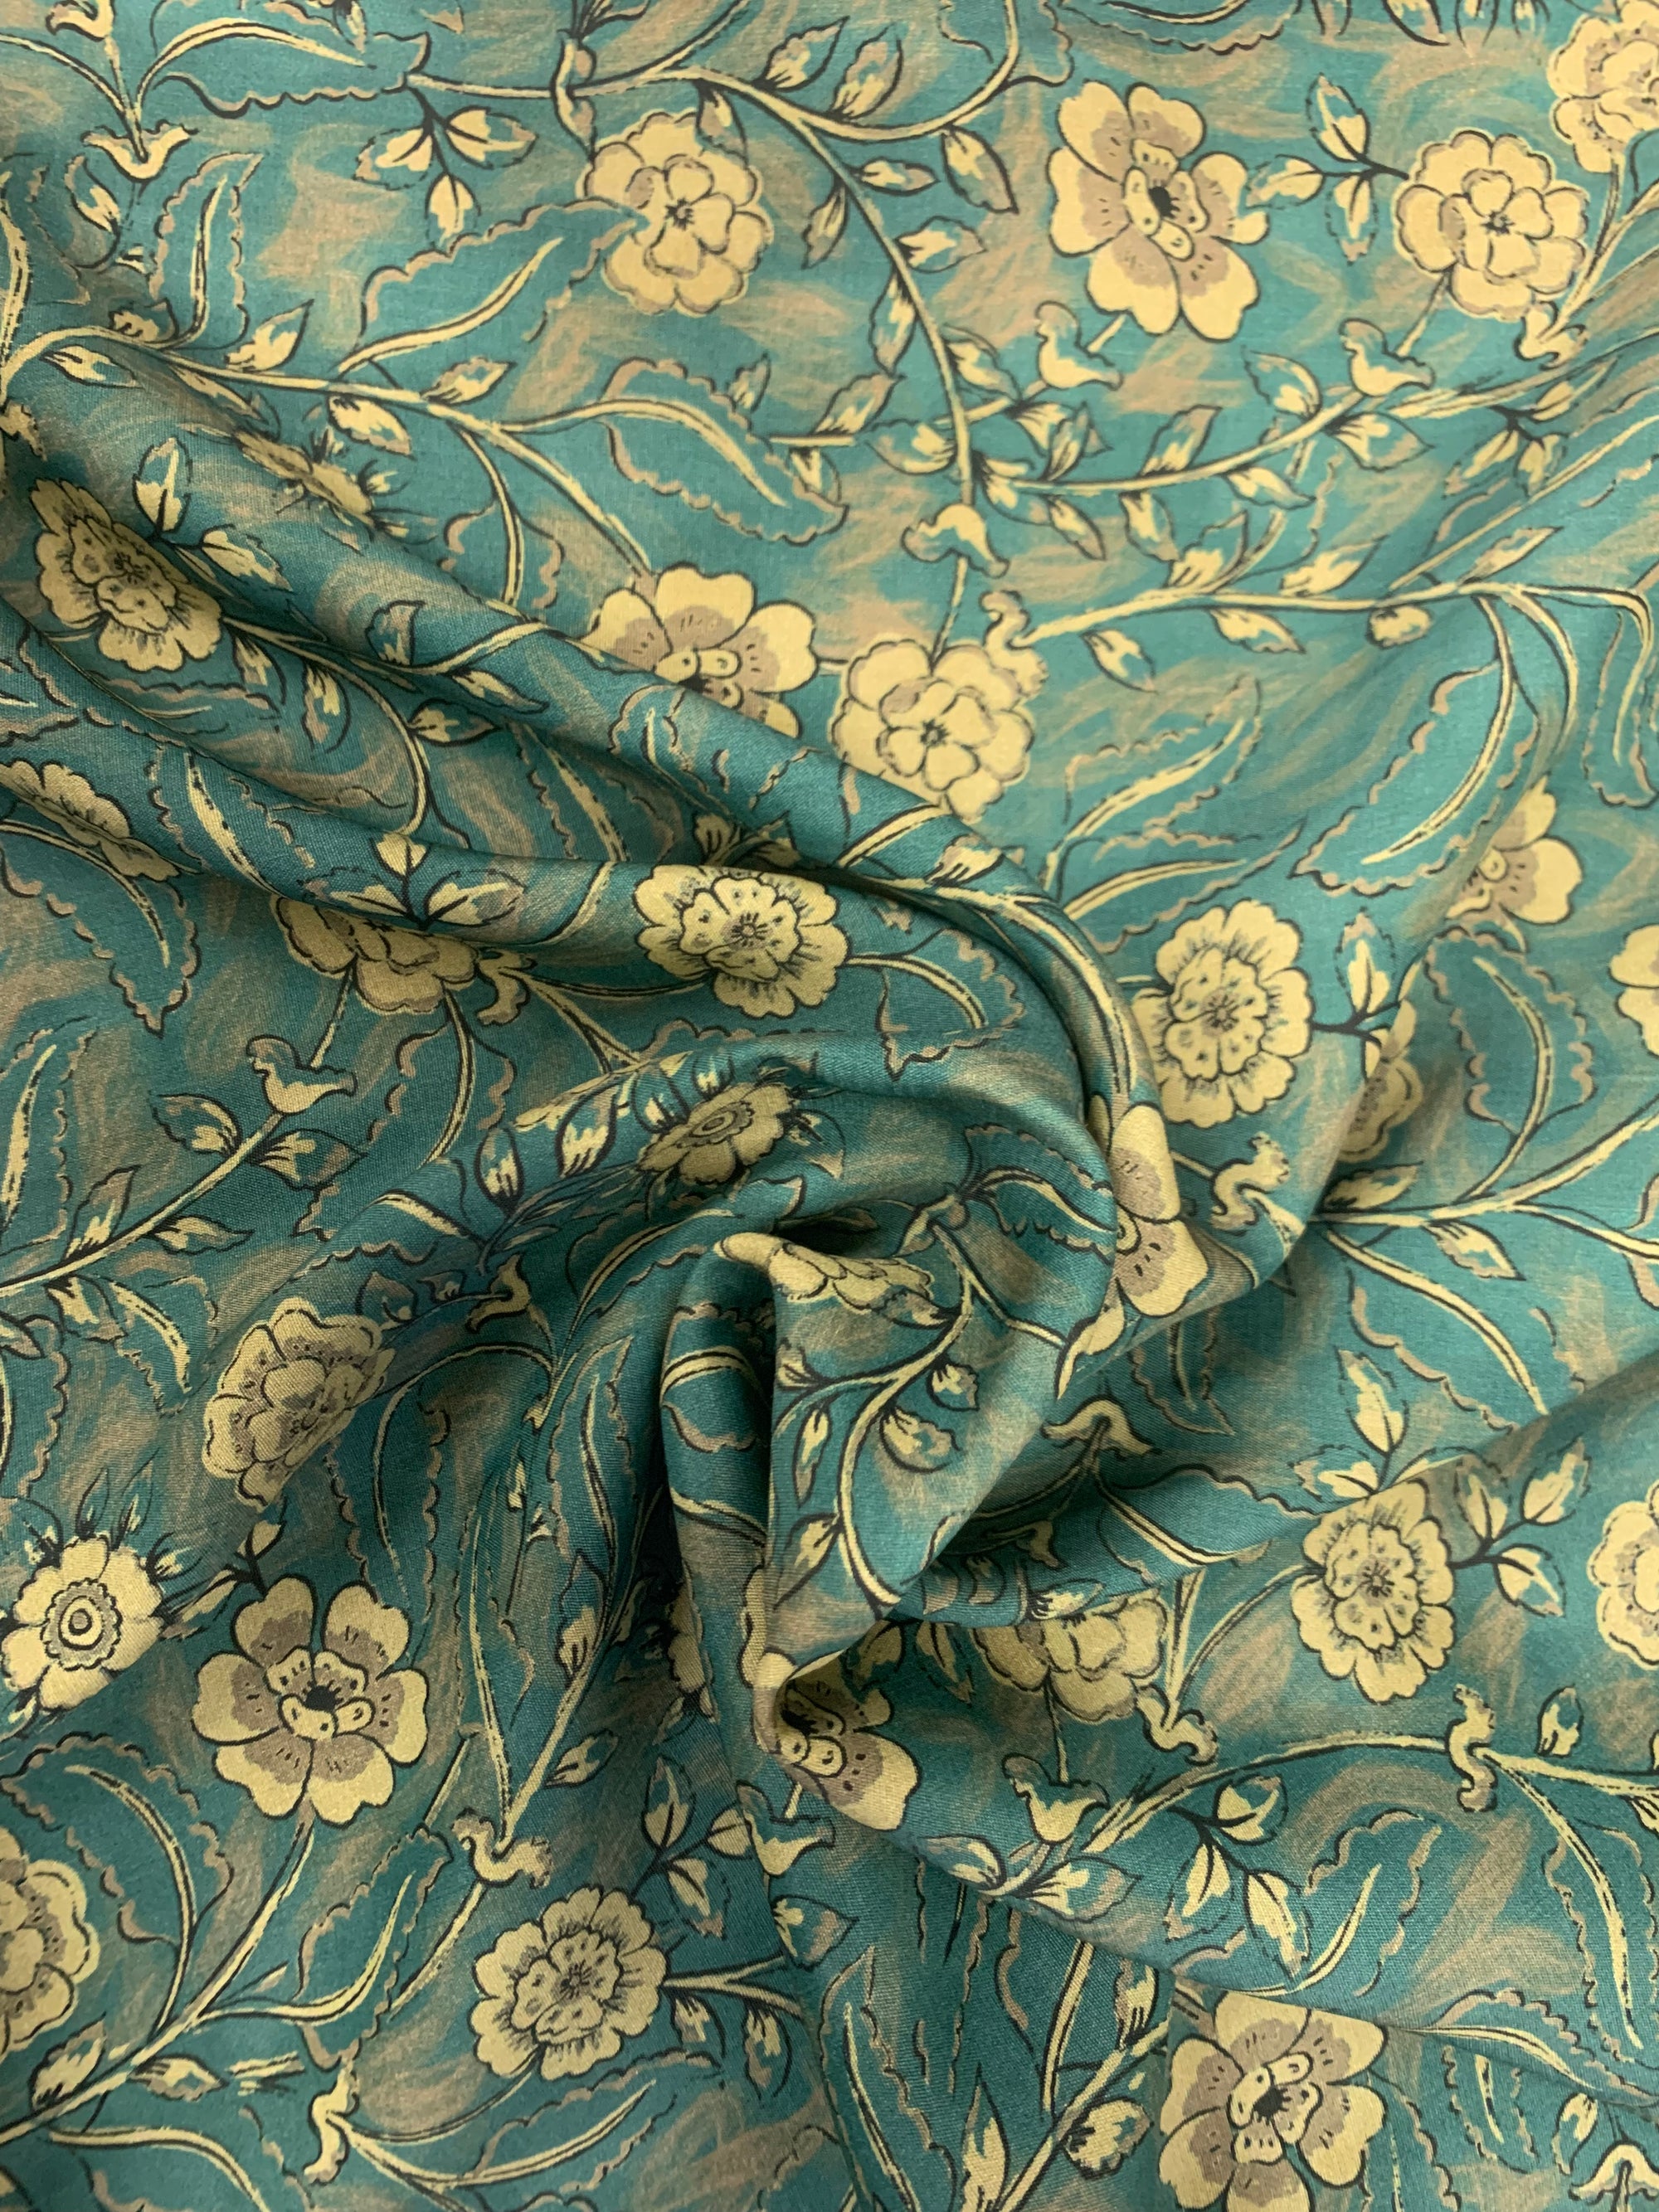 Viscose Challis Fabric is a Teal/Taupe floral print in a spiral.